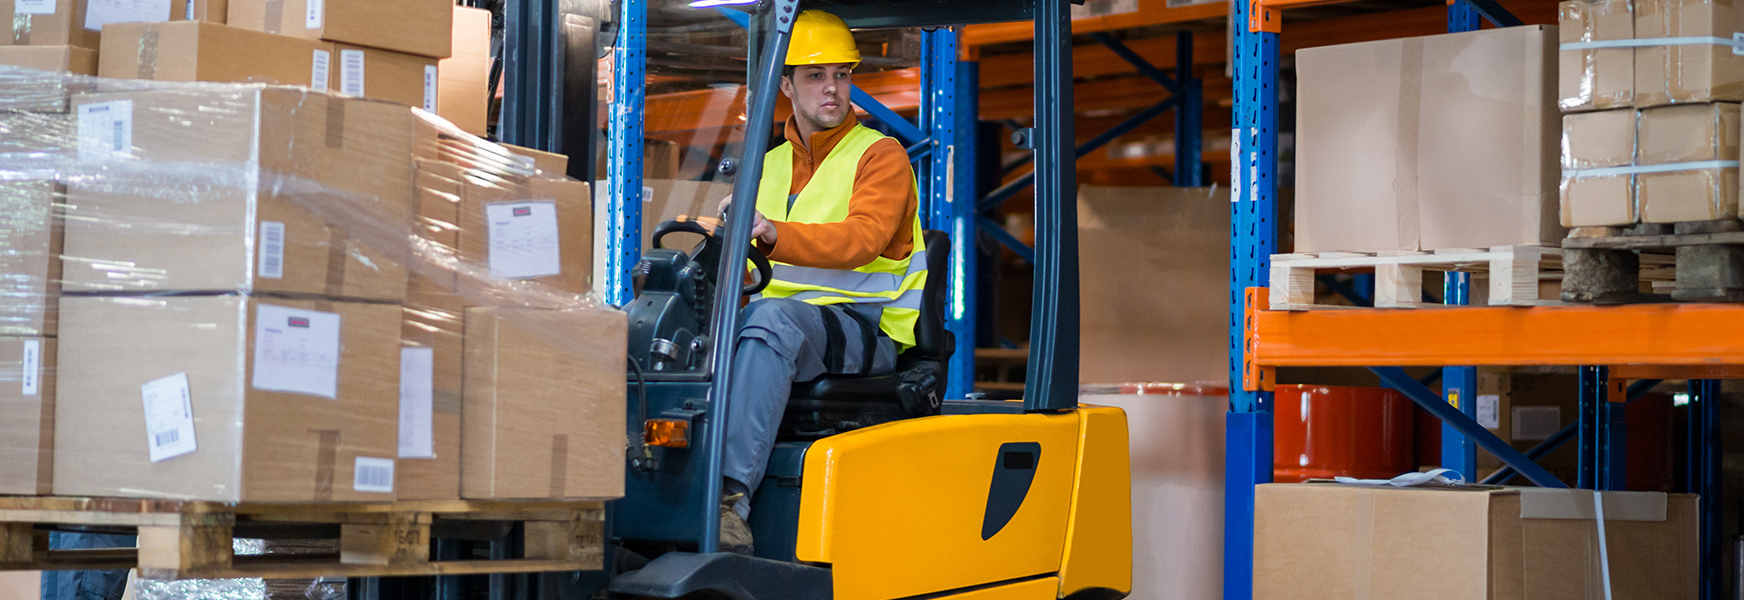 Worker Operating a Forklift